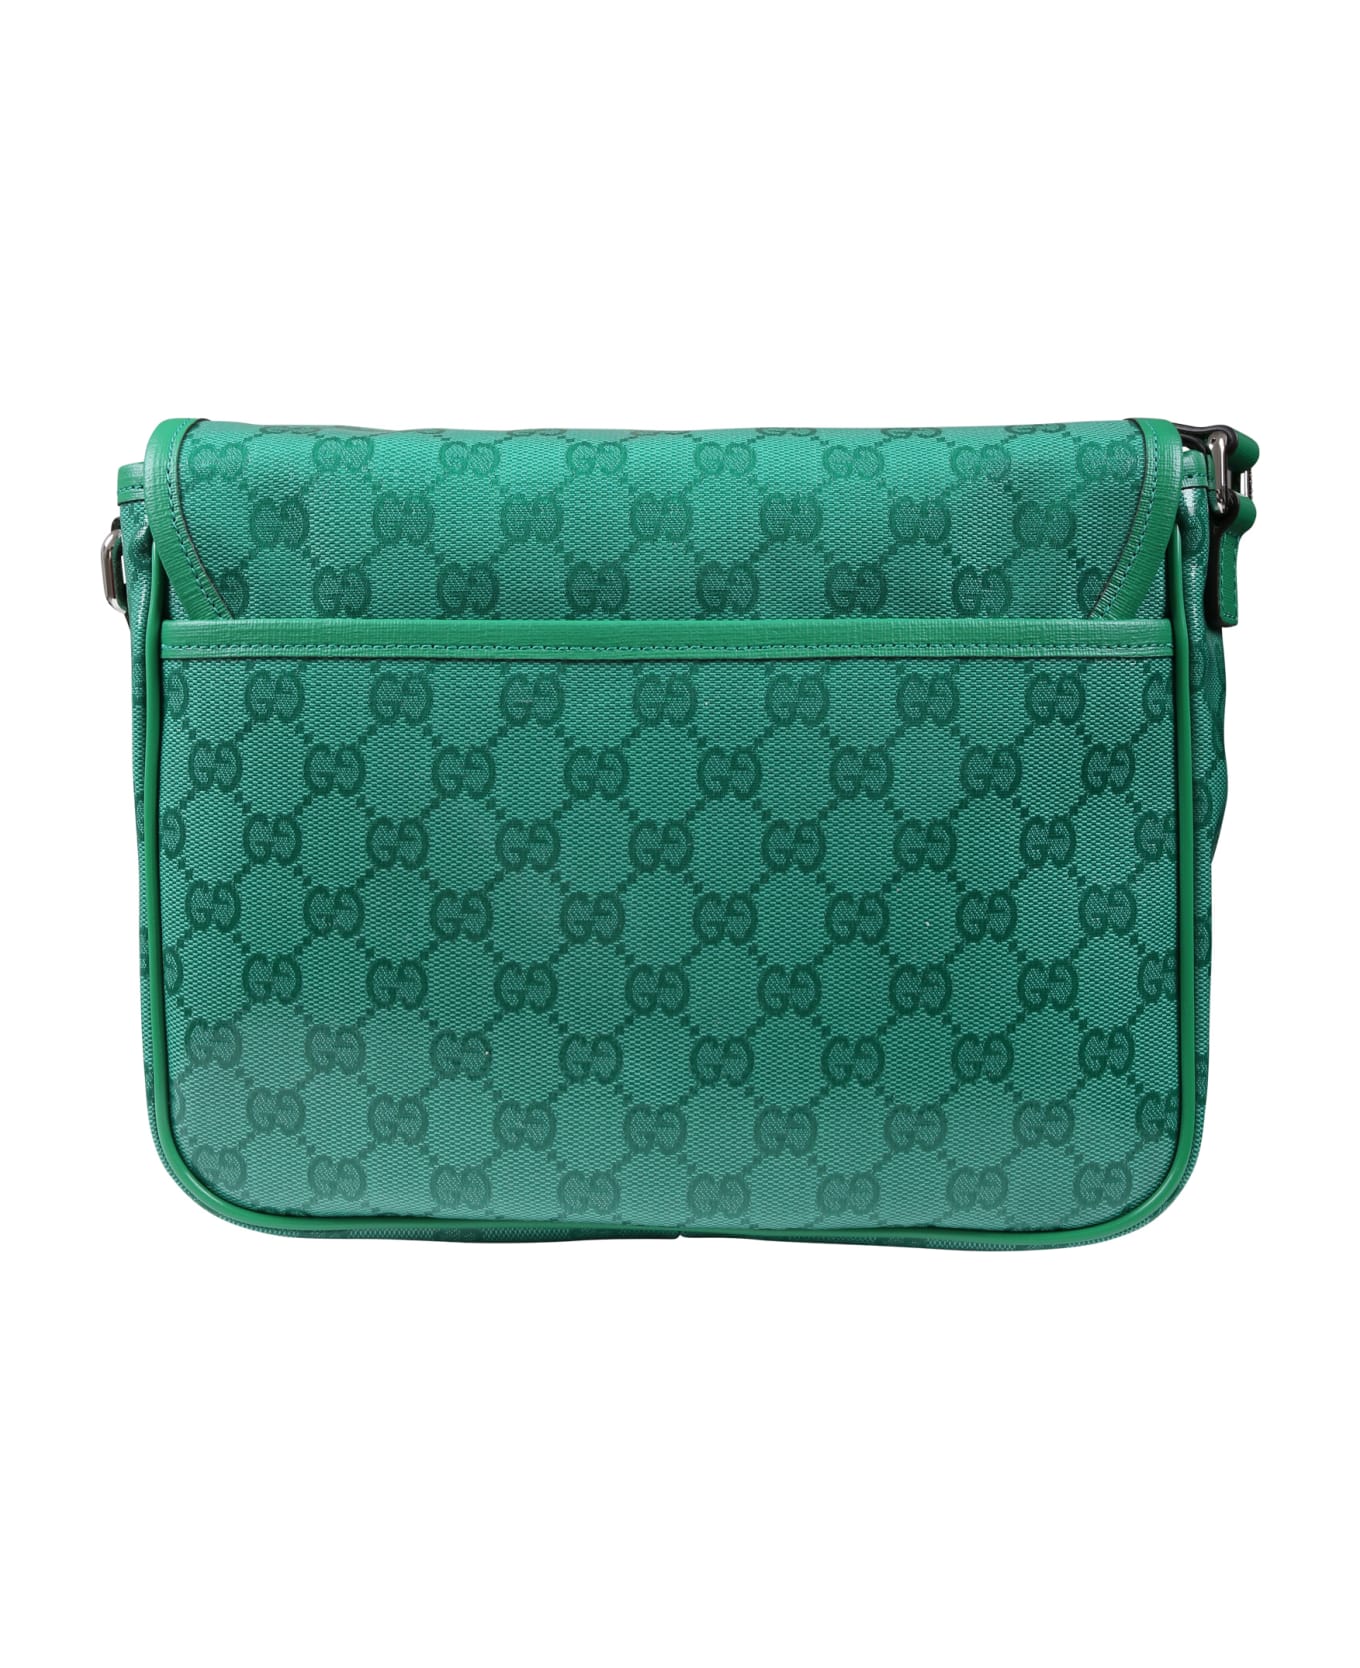 Gucci Green Bag For Girl With Gg Motif - Green